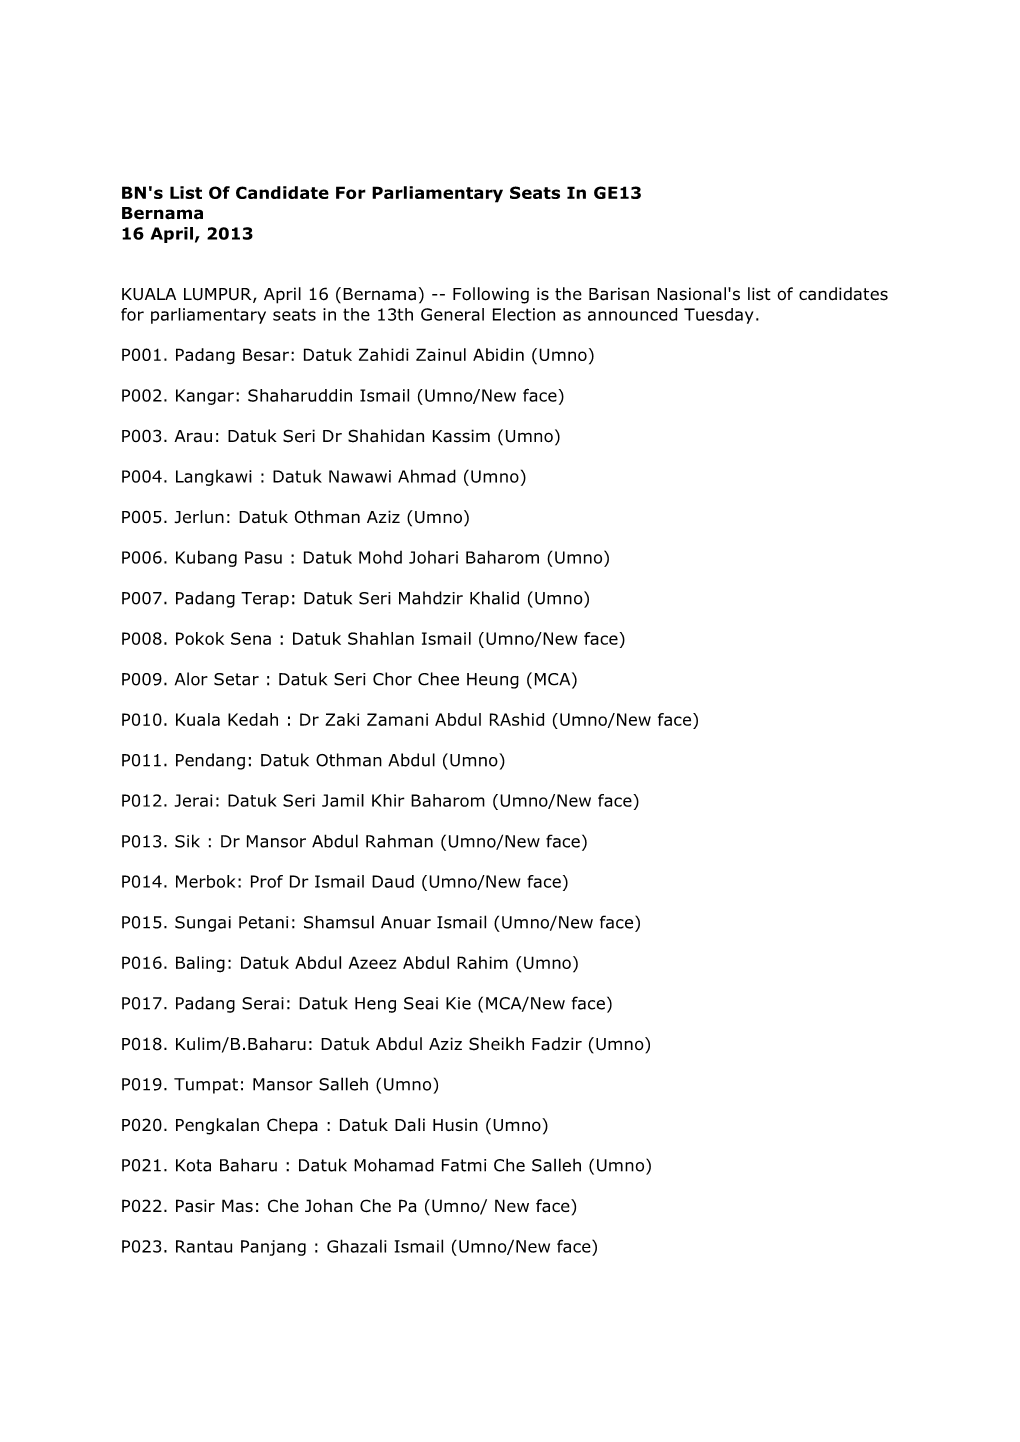 BN's List of Candidate for Parliamentary Seats in GE13 Bernama 16 April, 2013